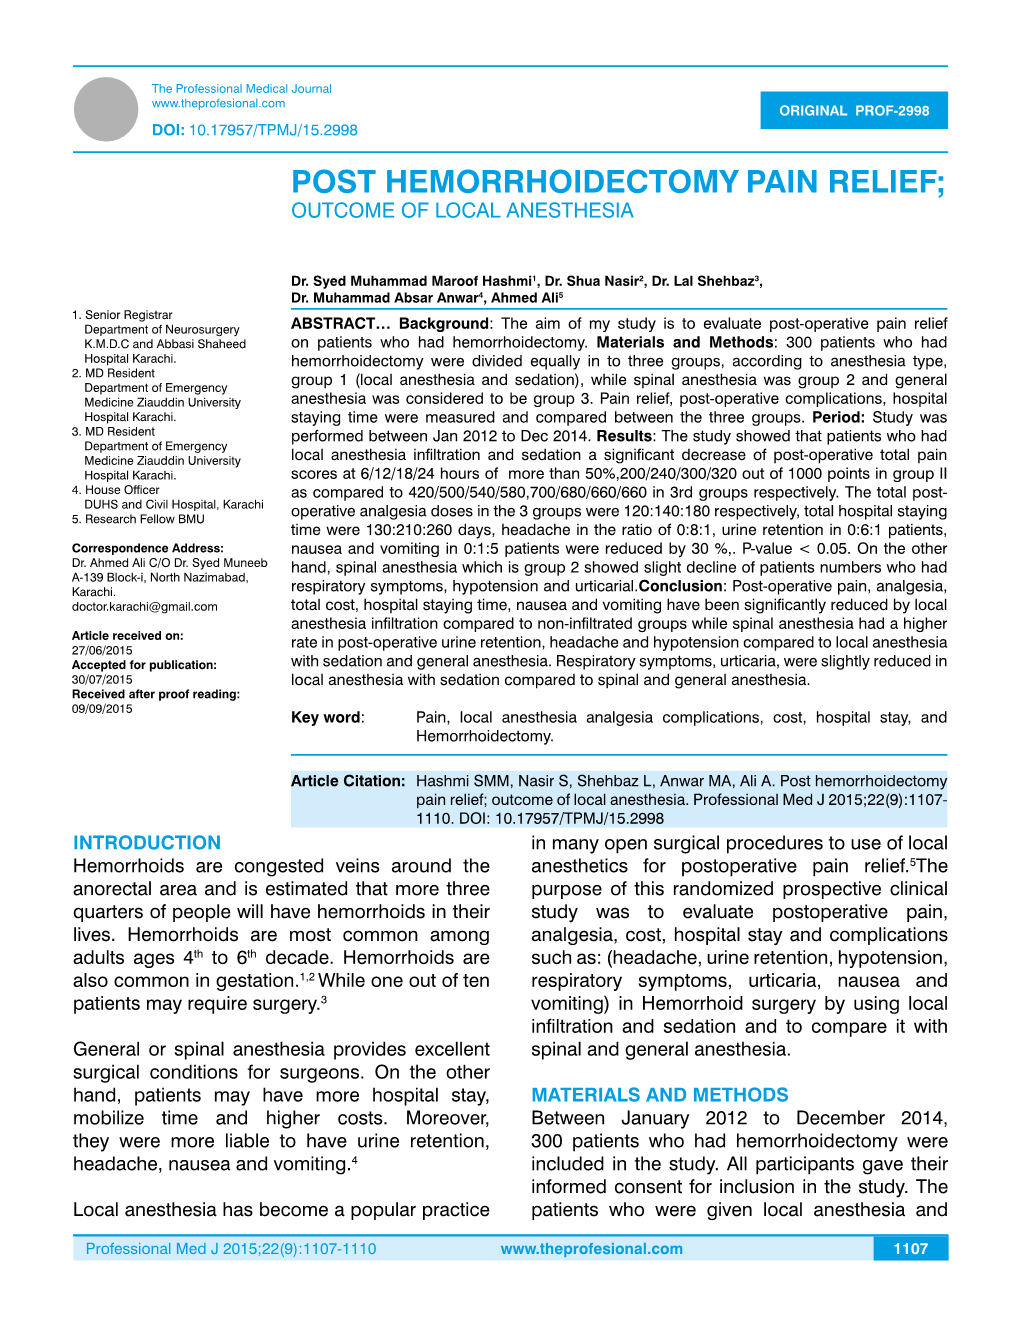 Post Hemorrhoidectomy Pain Relief; Outcome of Local Anesthesia